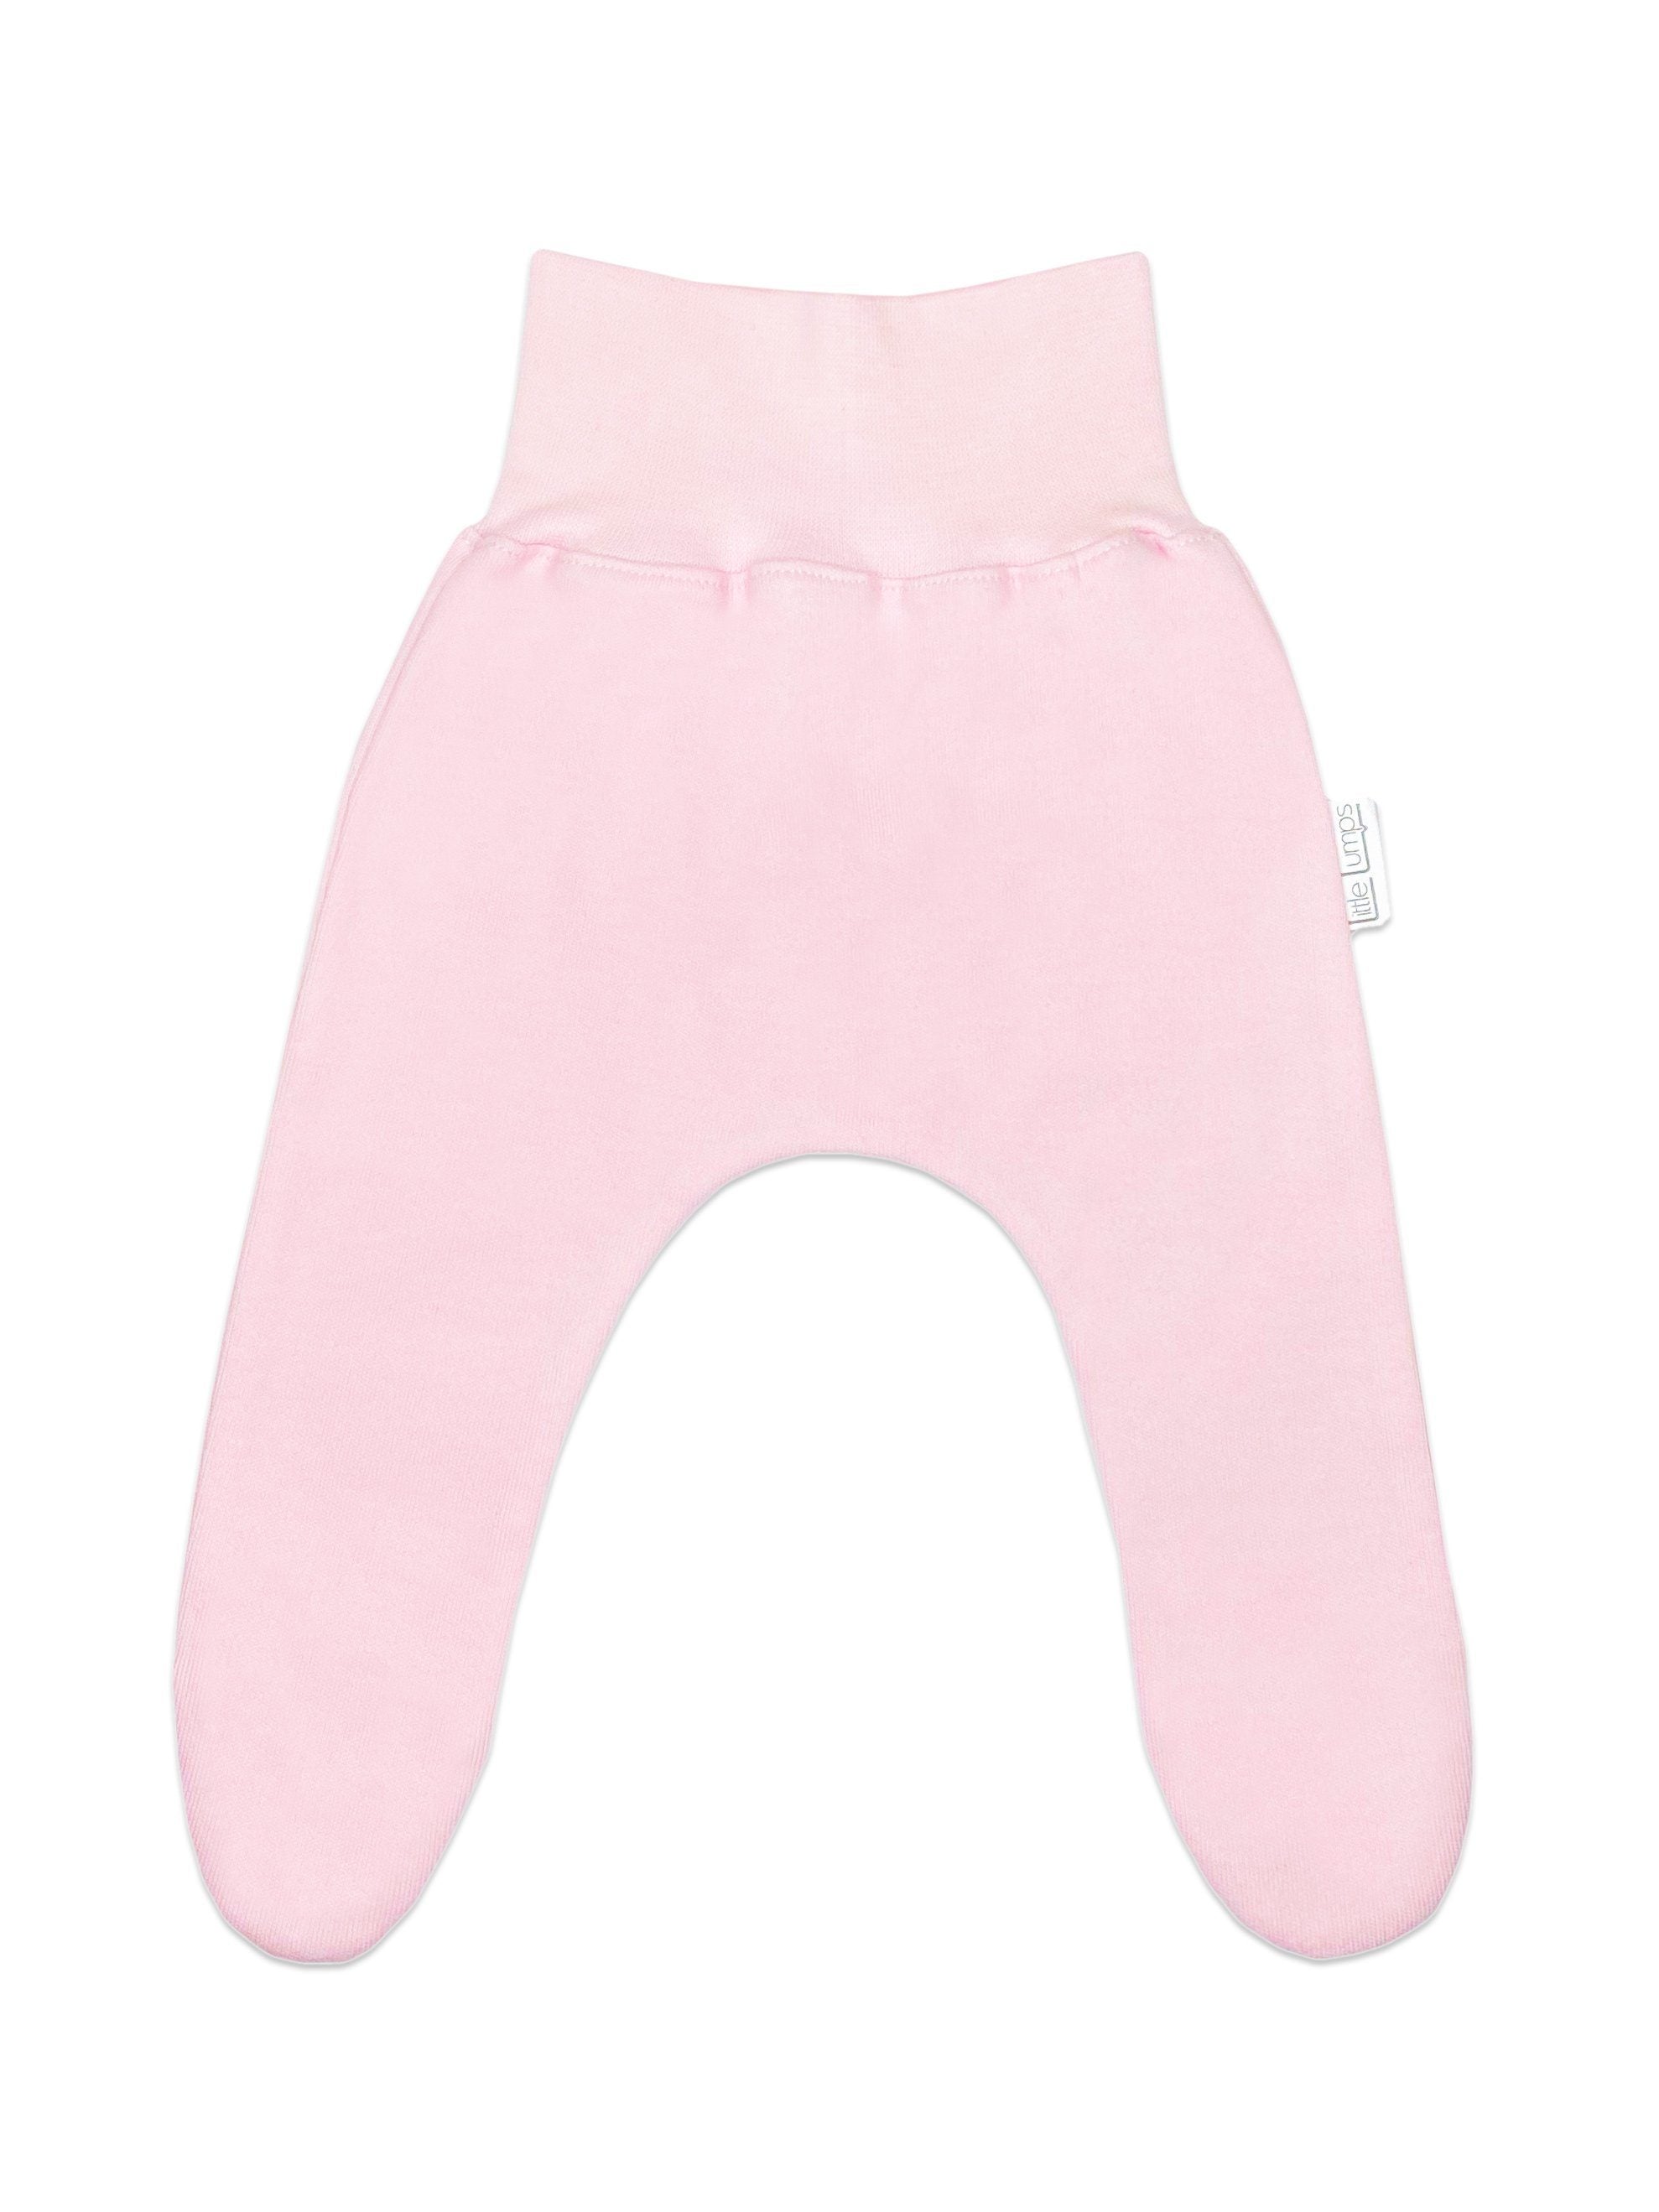 100% Cotton Footed Leggings - Pink Trousers / Leggings Little Lumps 